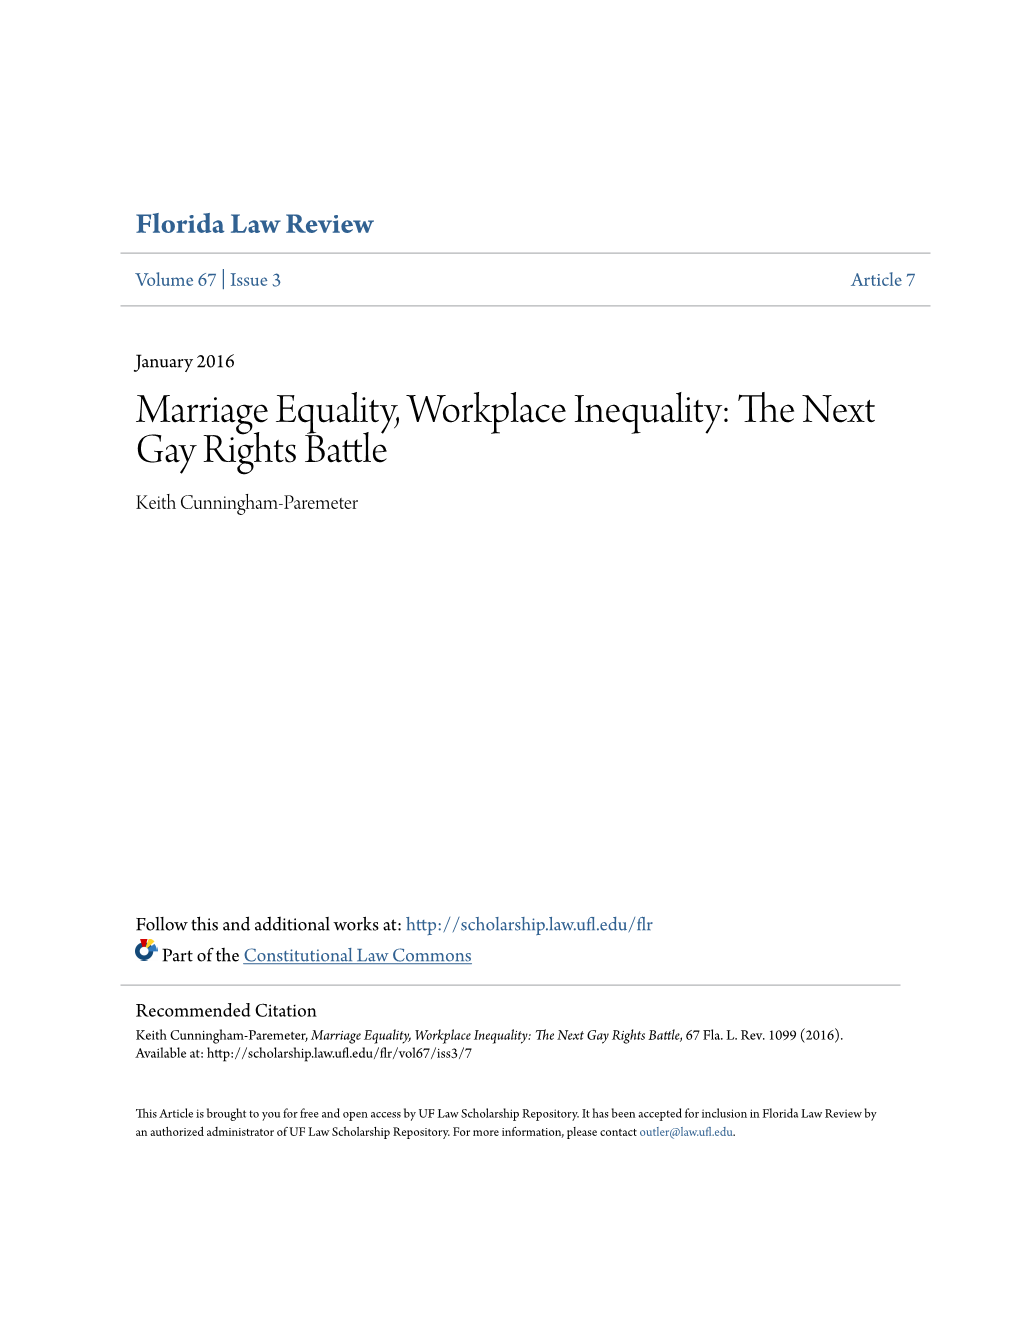 Marriage Equality, Workplace Inequality: the Next Gay Rights Battle, 67 Fla